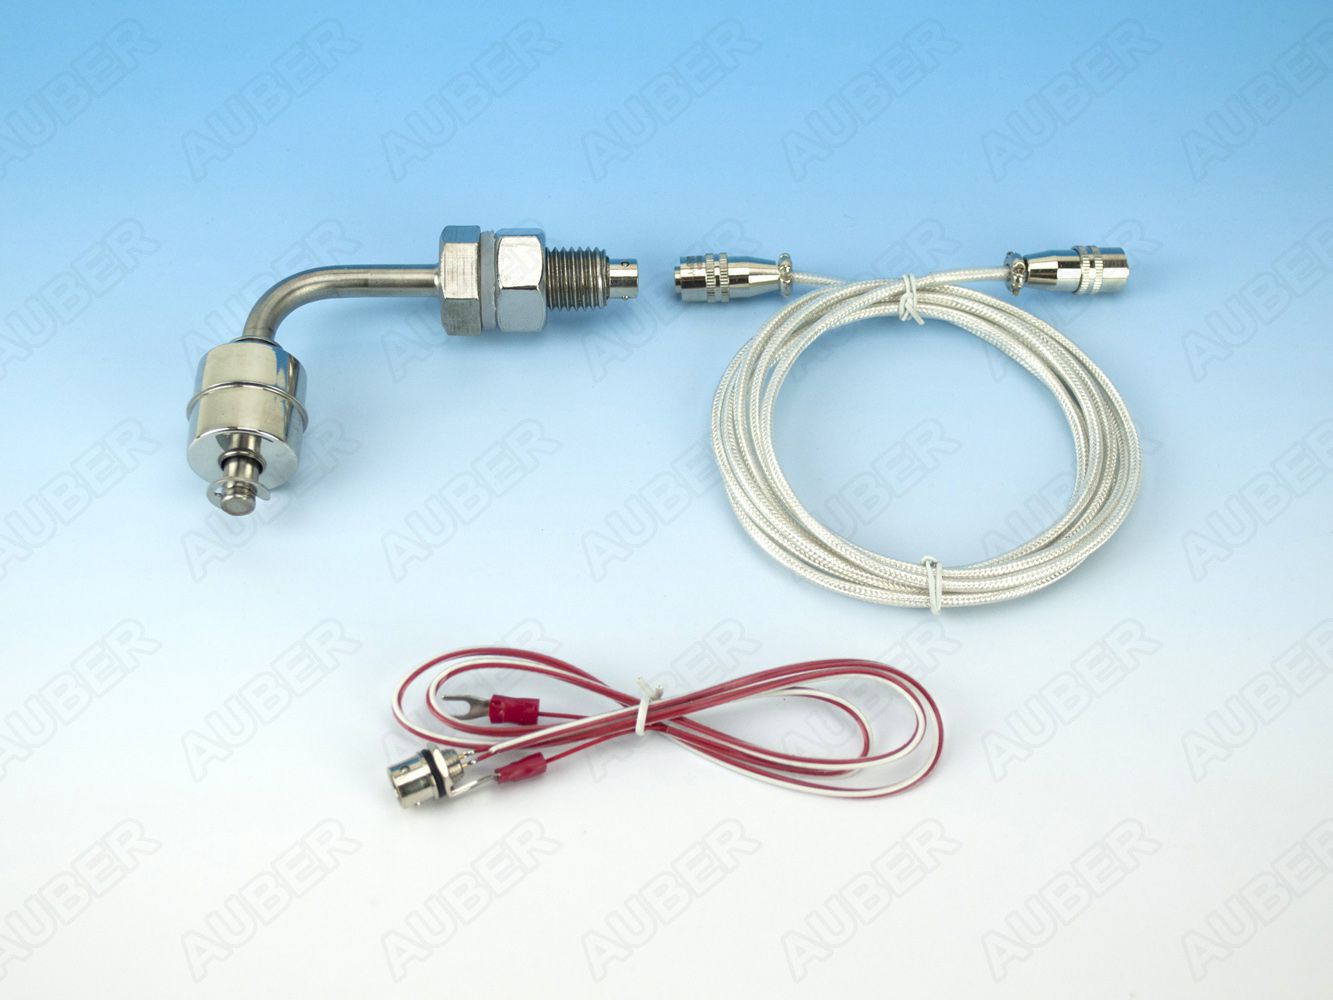 Liquid Level Control Switch. W/ Detachable Cable (Out of Stock) - Click Image to Close